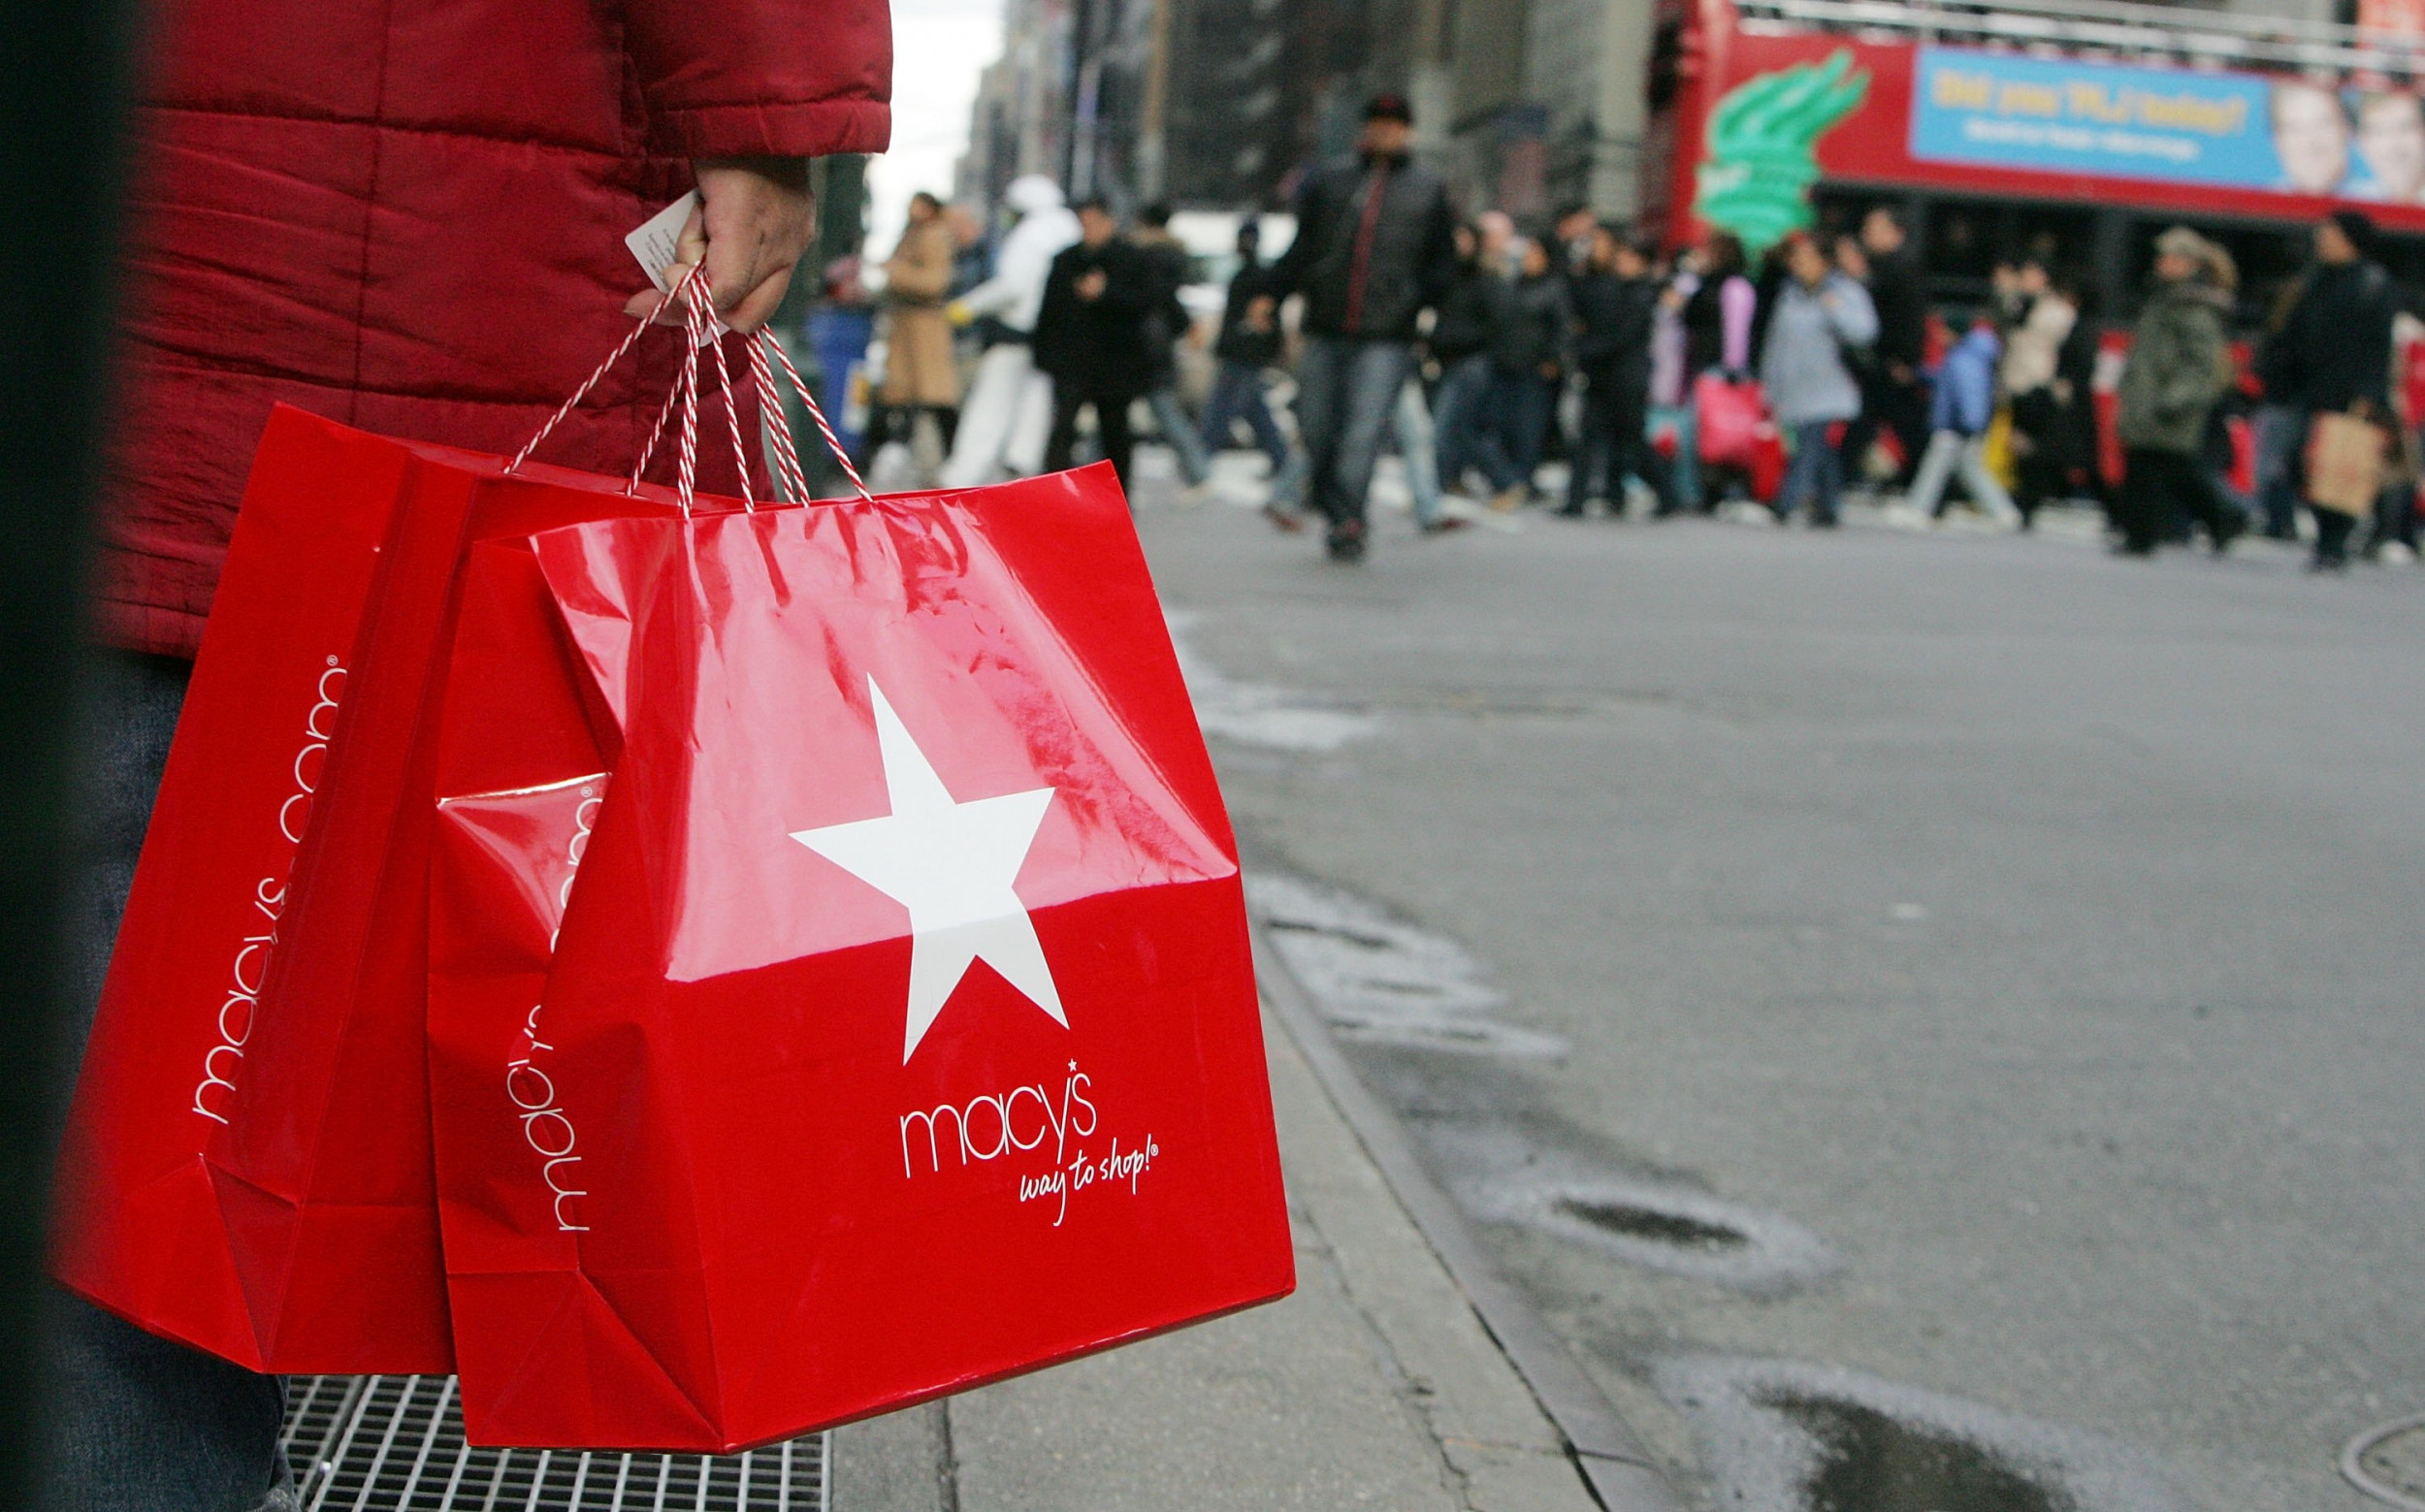 Macy's Black Friday Sale 2019: Opening Hours, Promo Codes, Free